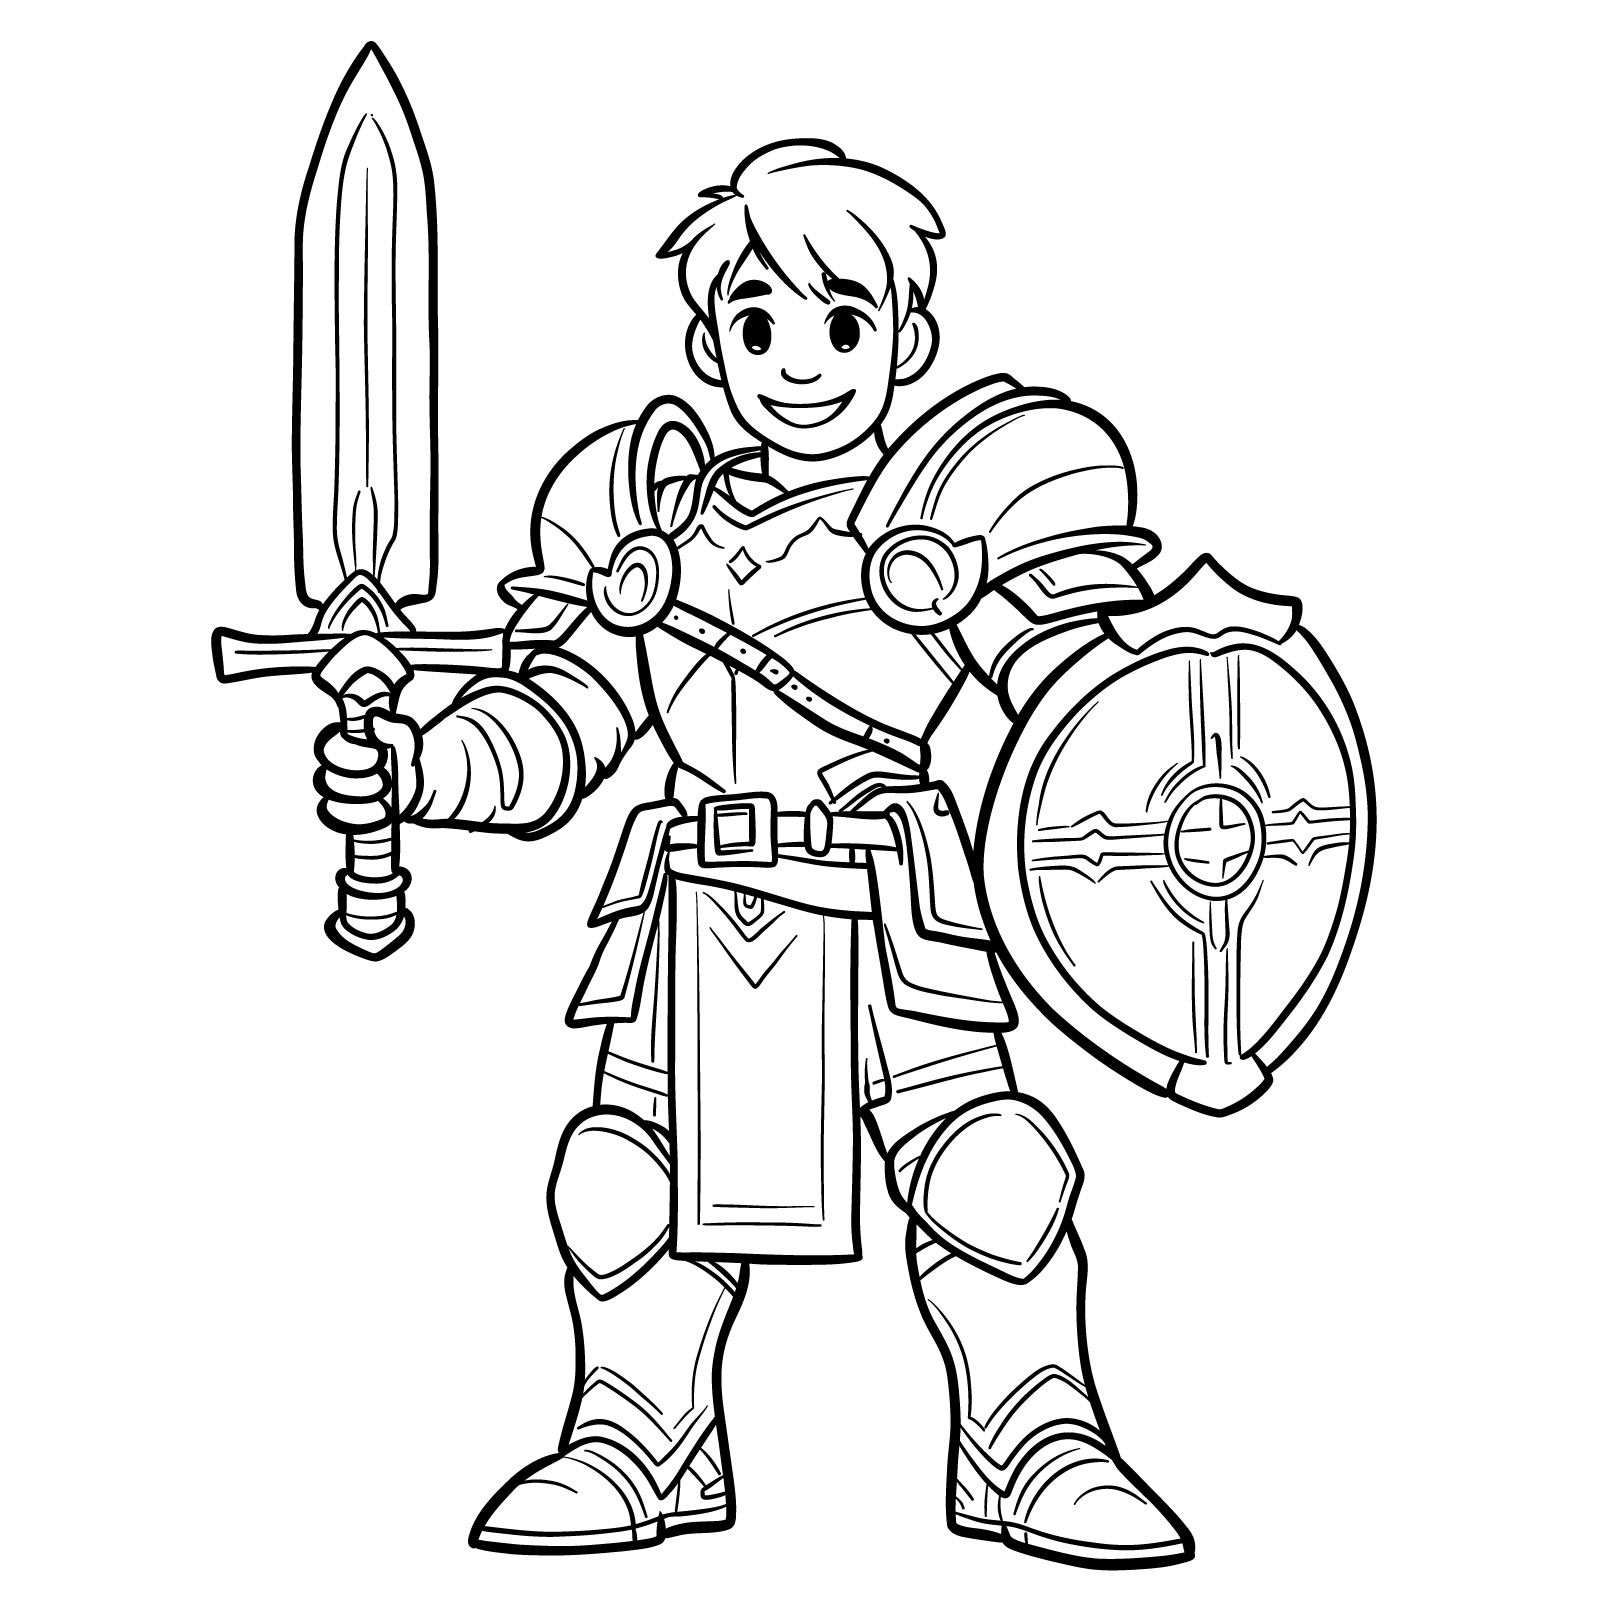 Easy drawing of a cartoon style Paladin